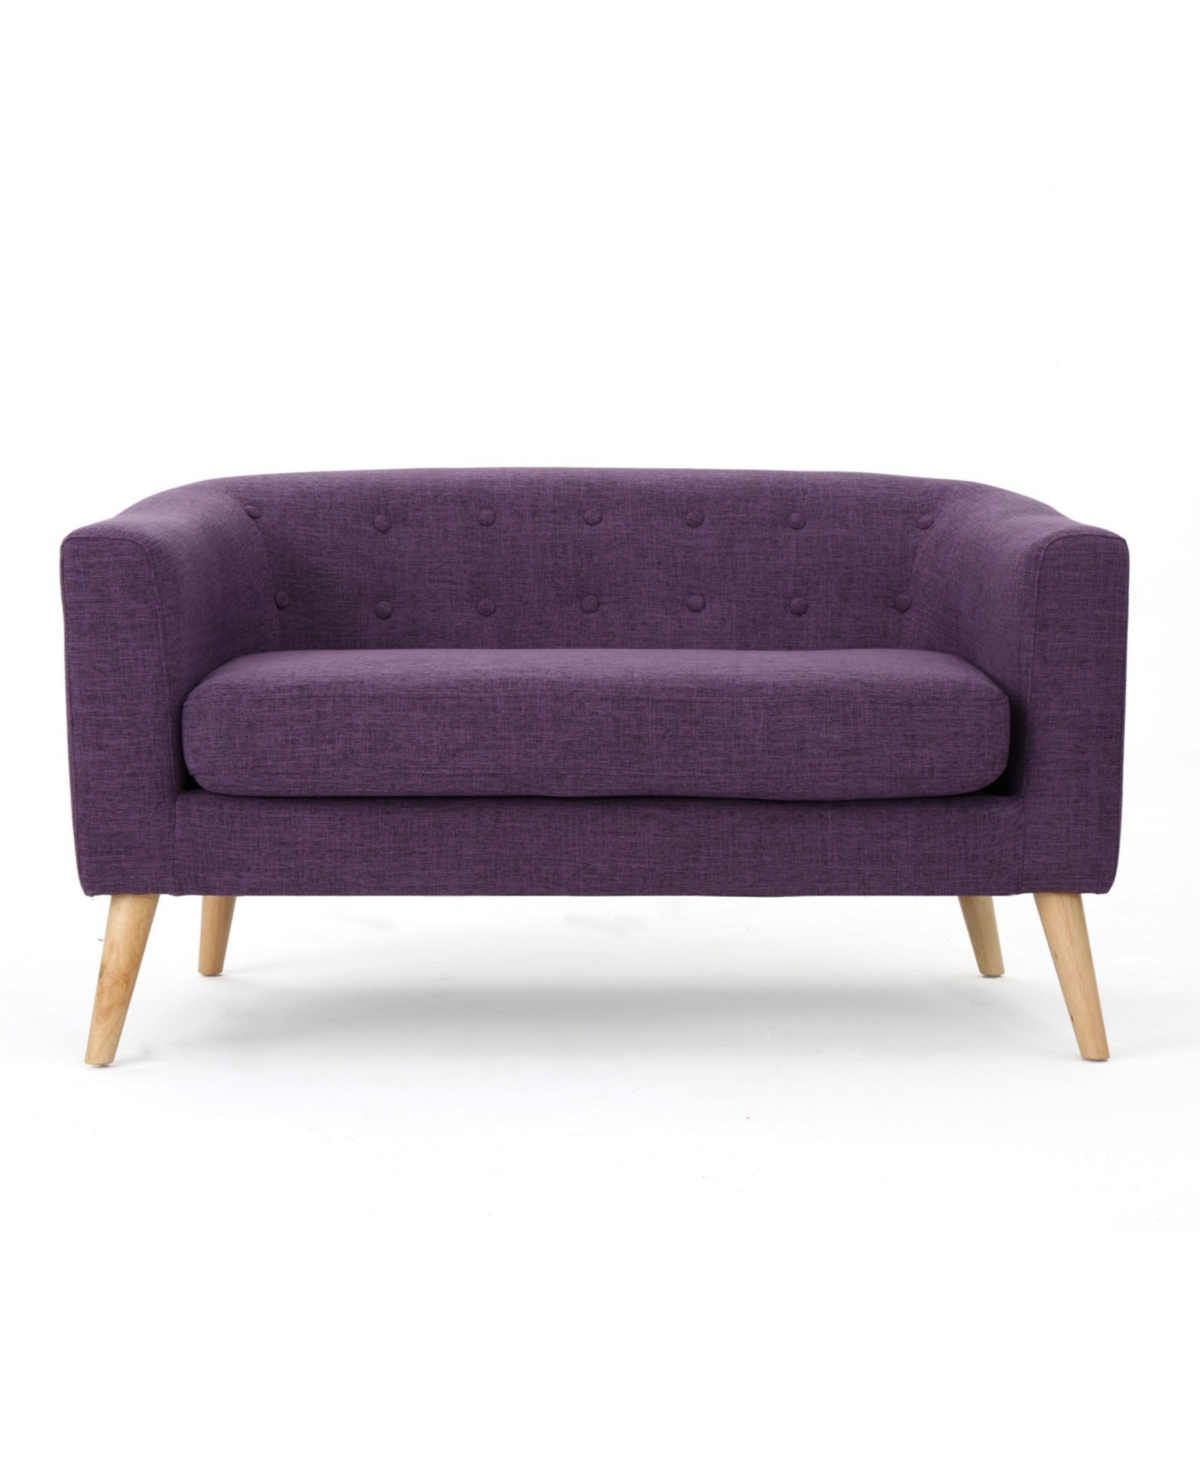 Noble House Bridie Muted Mid Century Modern Loveseat In Muted Purple